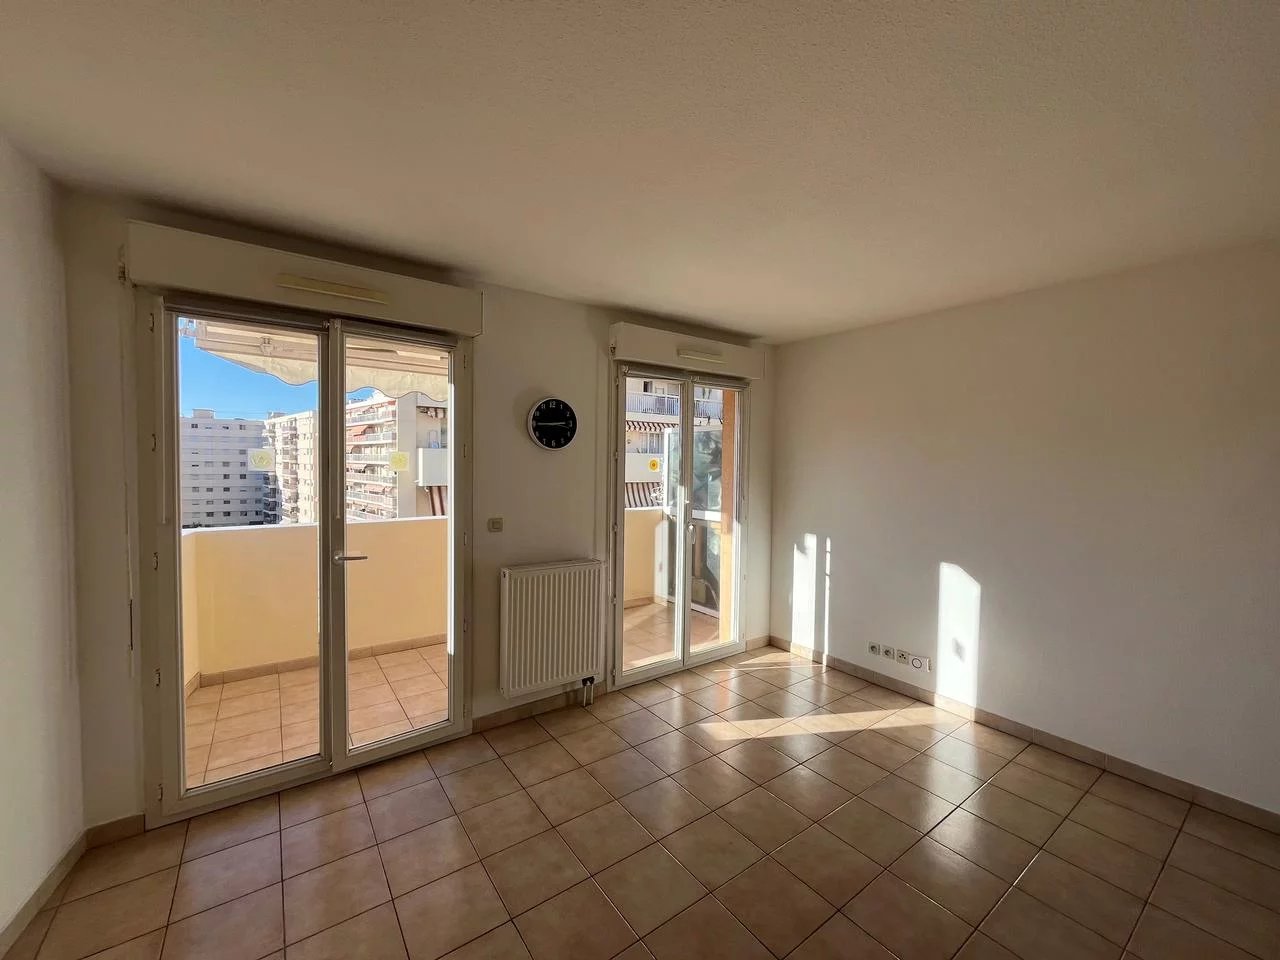 Appartement  3 Rooms 62m2  for sale   245 000 €